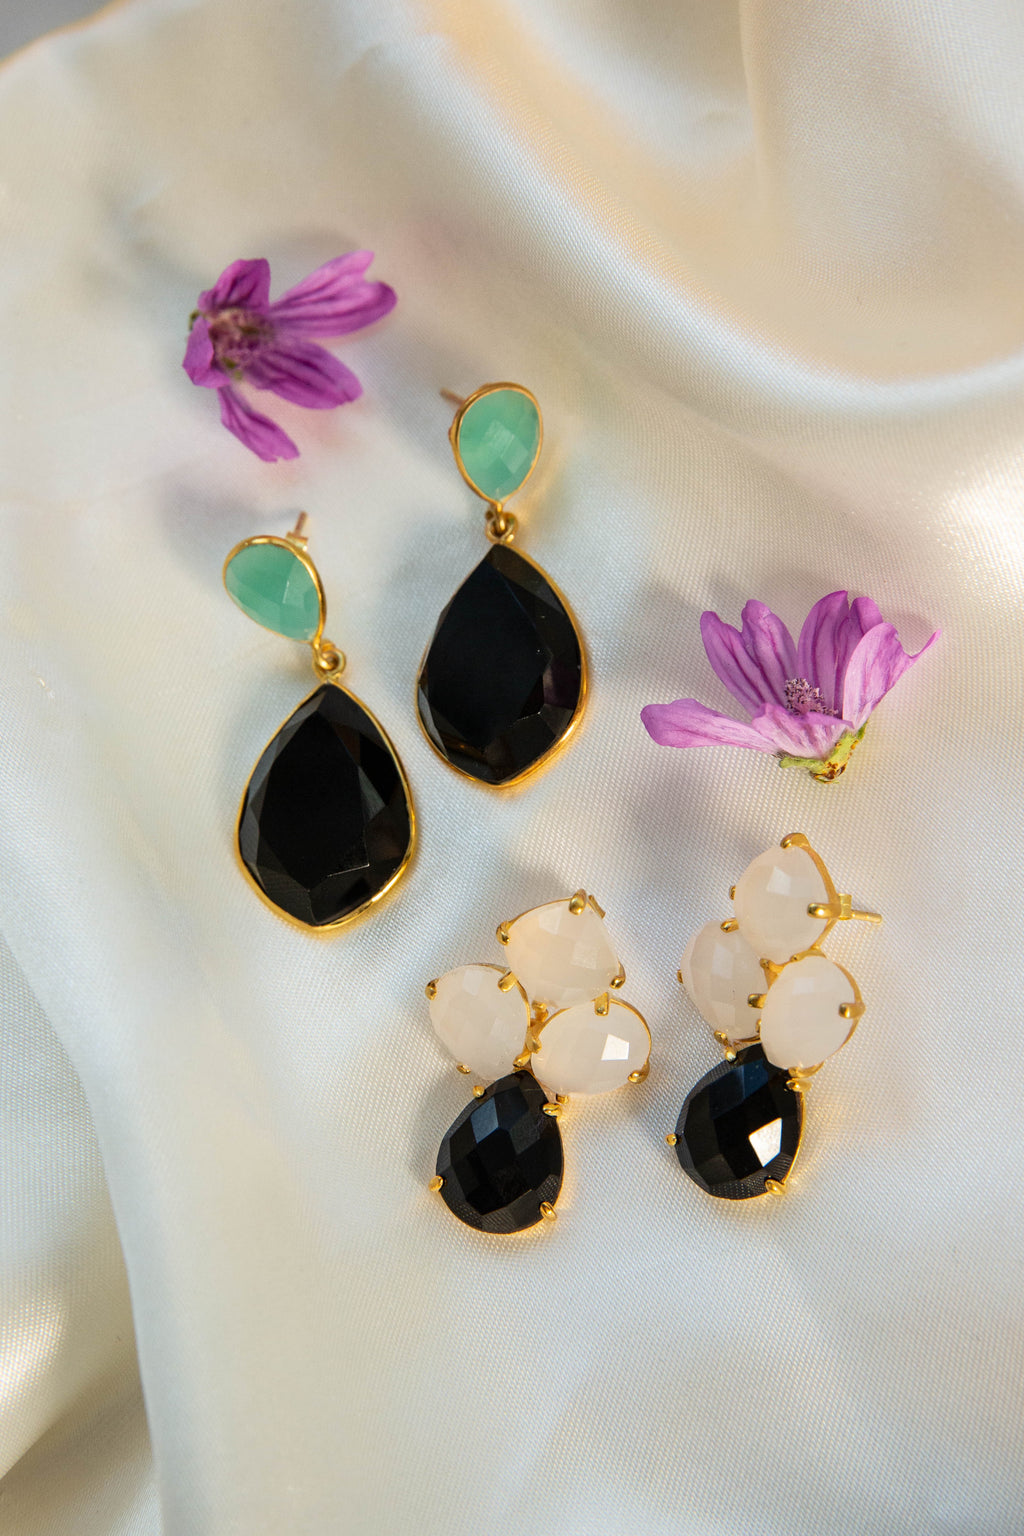 18kt Gold Vermeil Black Onyx and White Chalcedony Earring